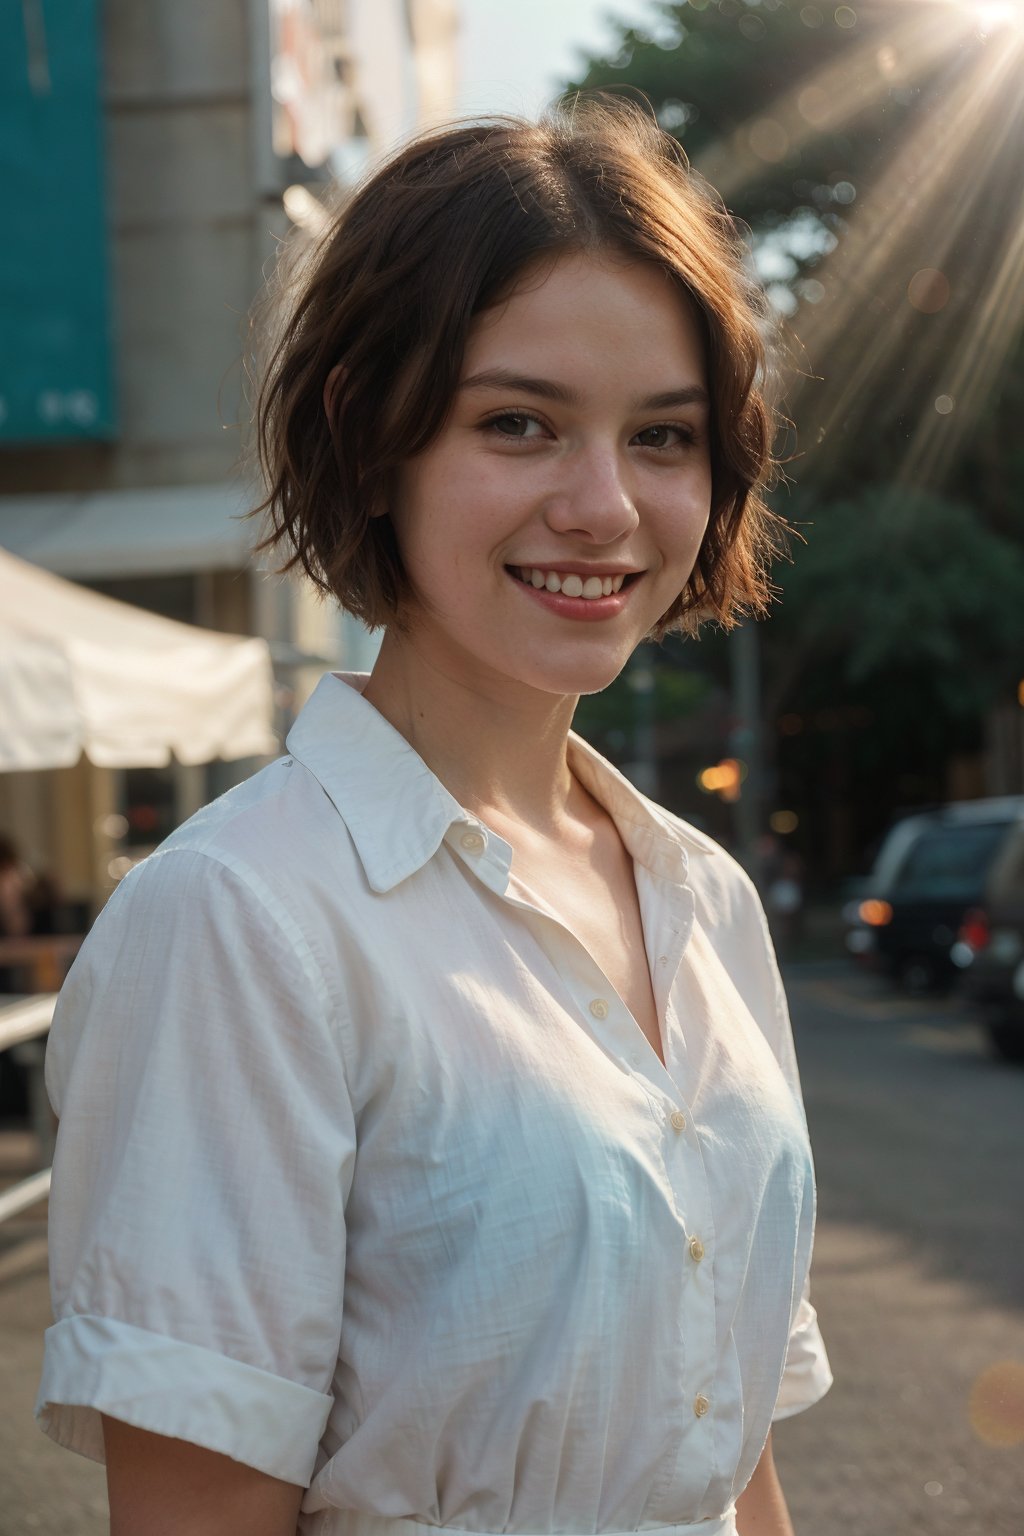 (realistic cinematic) portrait at nightlife of a 70s casual dress beautiful women 20 years old short hairstyles, smile expressionless, , 70s hairstyle, 70s fashion, white shirt, sun rays, light teal and amber, soft hues, Cinestill 50D